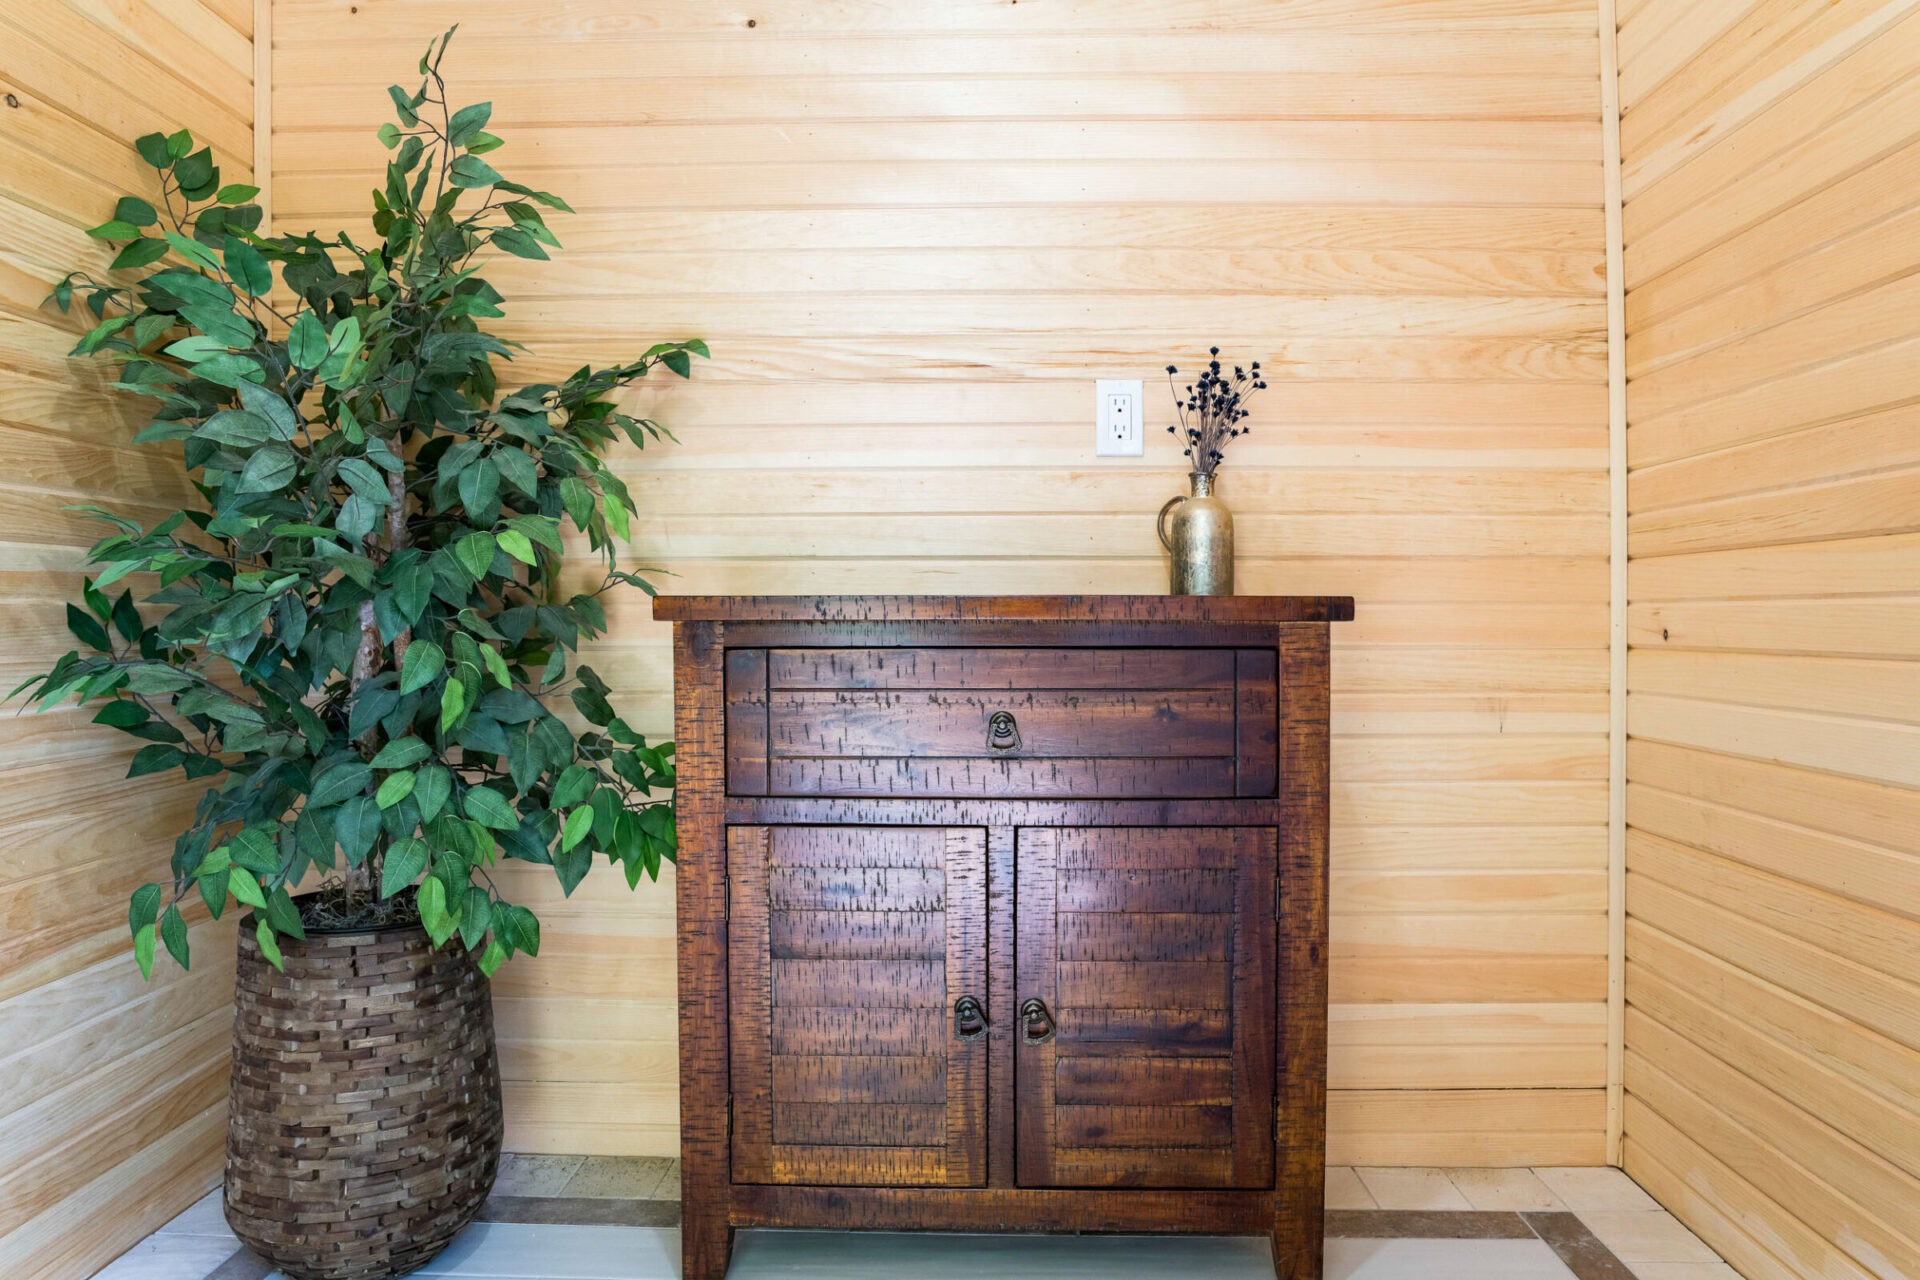 A room corner featuring a large indoor plant in a woven basket and a rustic wooden cabinet with a vase of dried flowers atop it, against a wood-paneled wall.